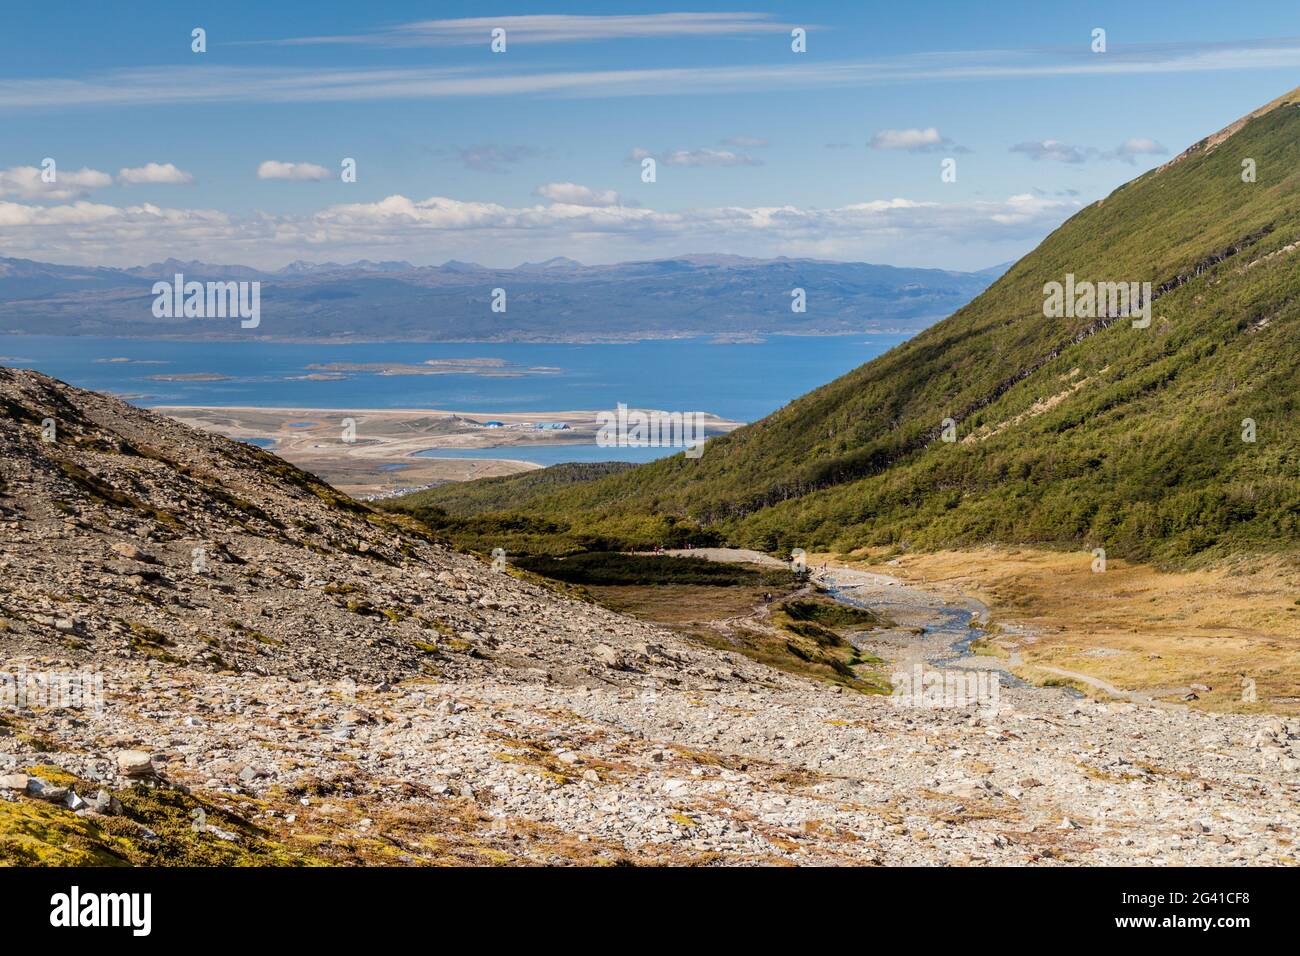 View of Beagle channel and mountains near Ushuaia, Argentina Stock Photo